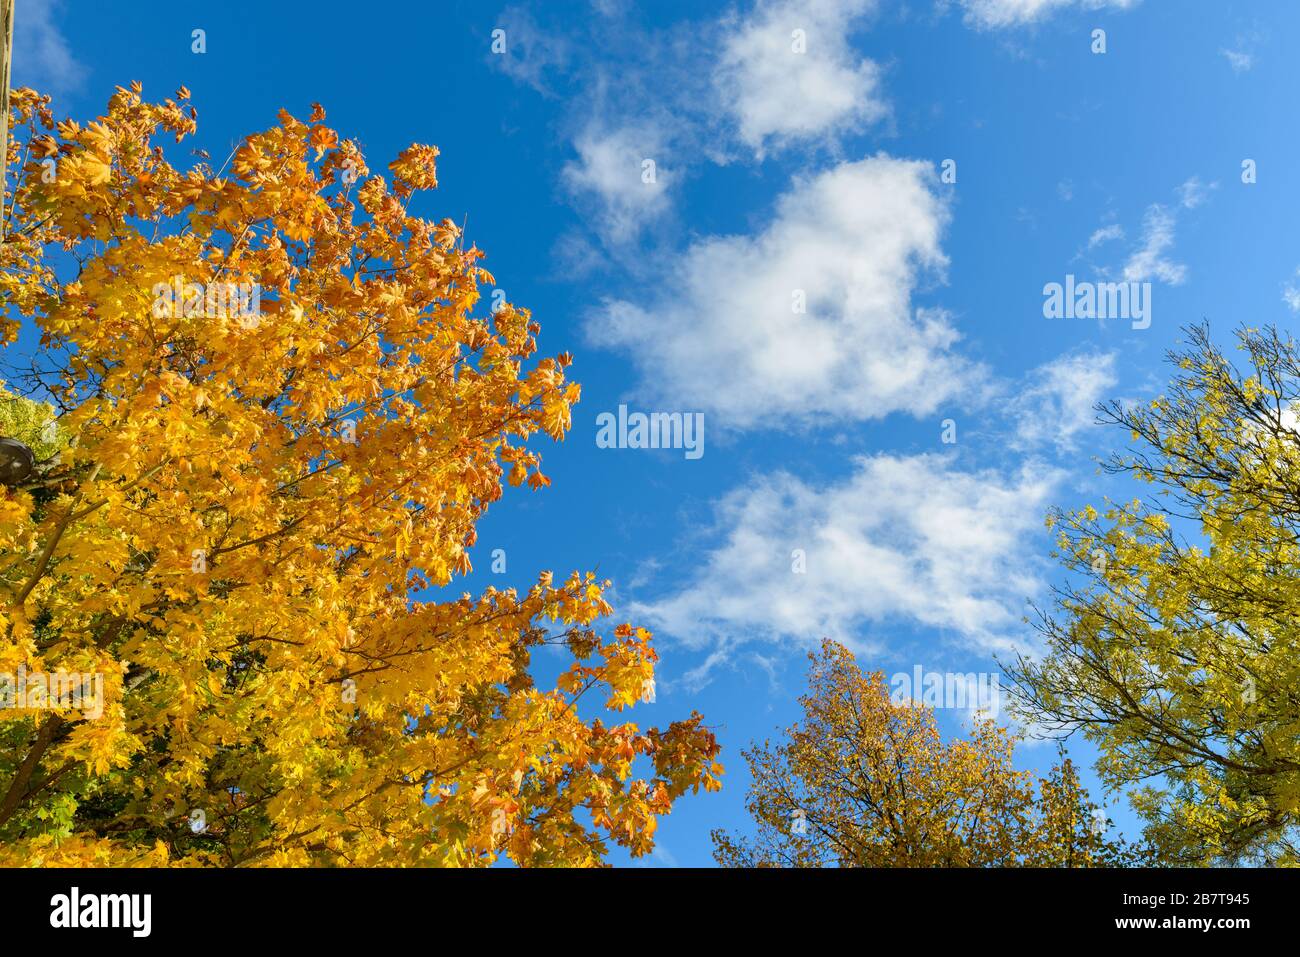 Portrait of autumn trees against view of blue sky Stock Photo